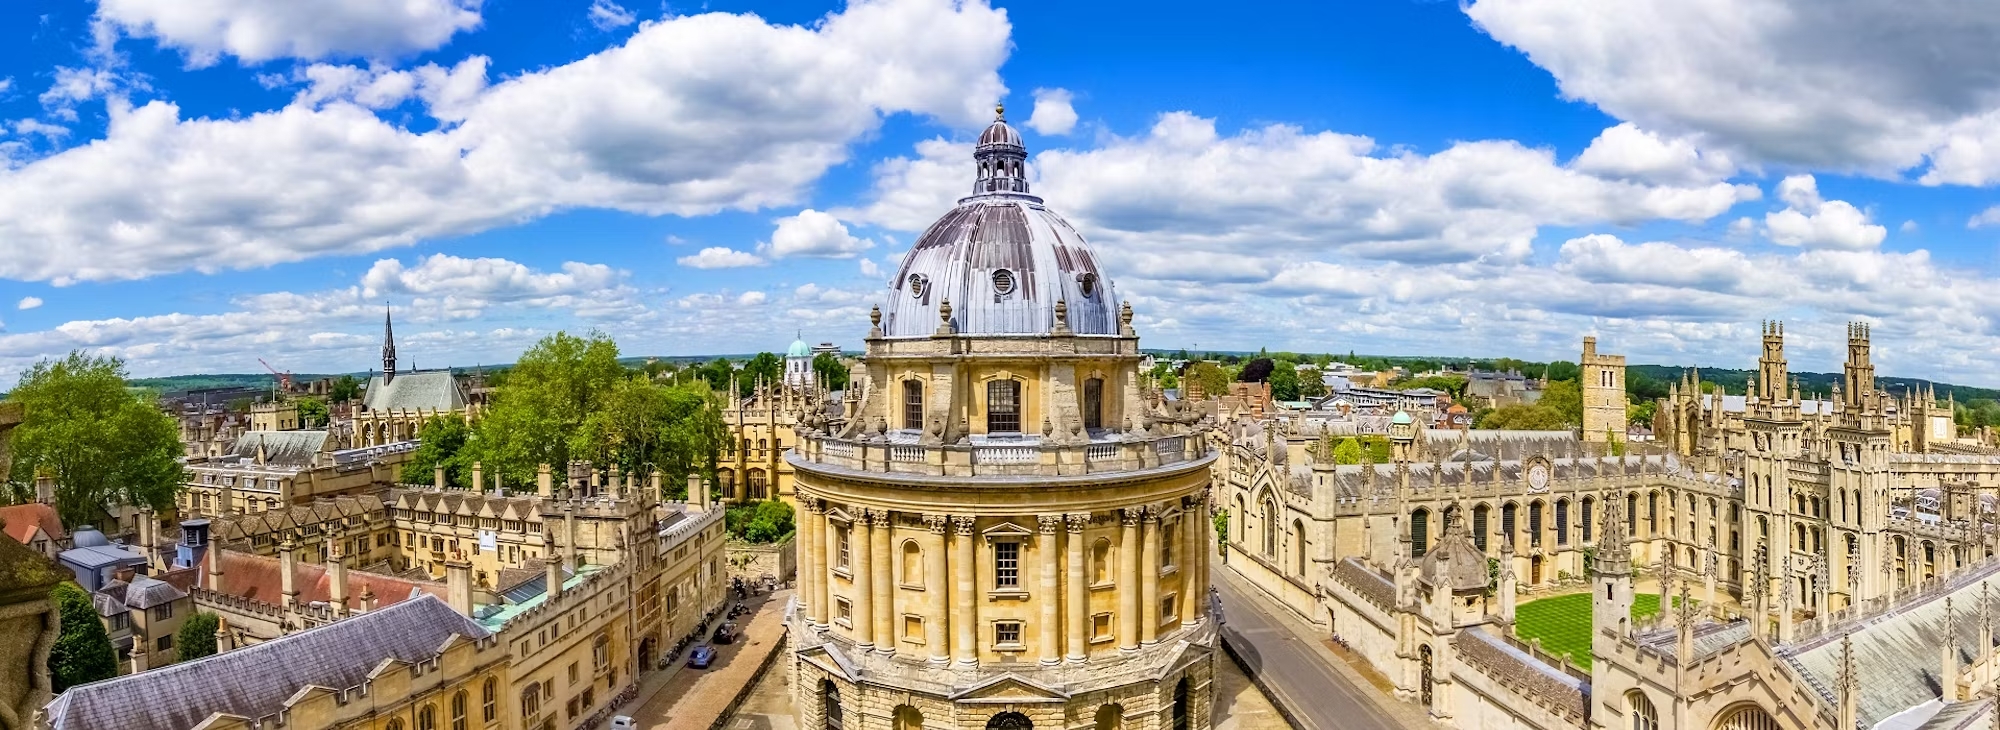 Oxford best european cities to visit